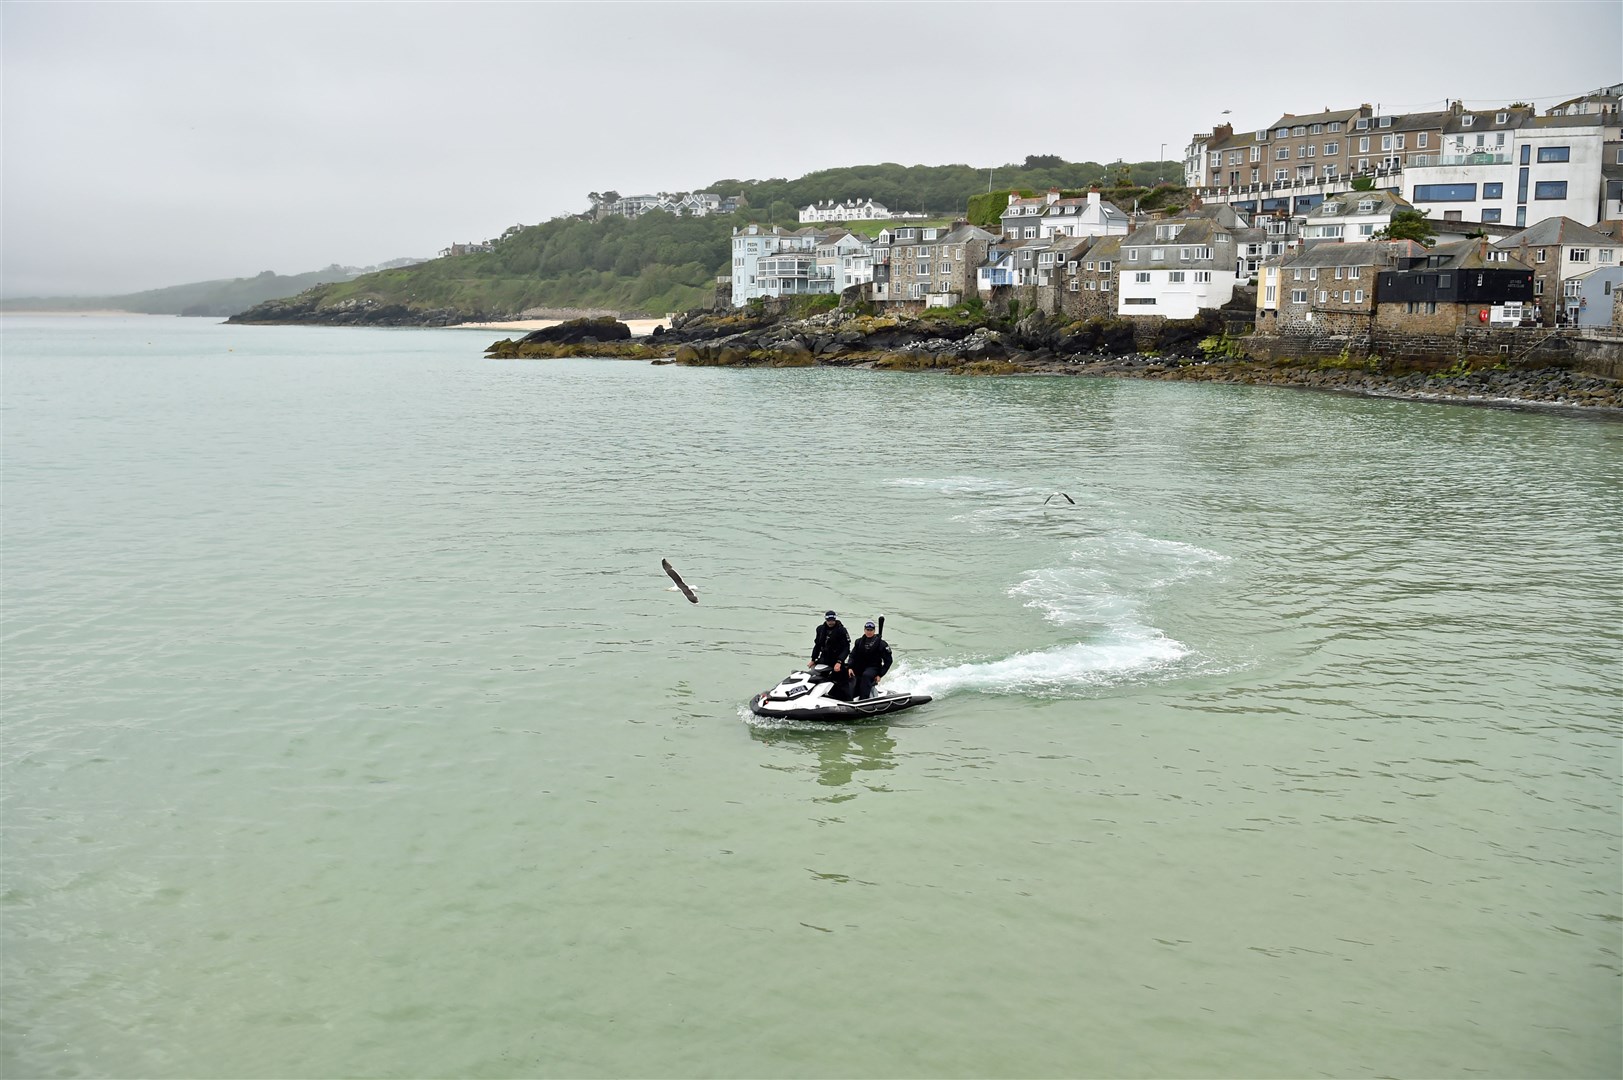 Police officers on a jet ski patrol the bay in St Ives during the G7 summit in Cornwall (Ben Birchall/PA)